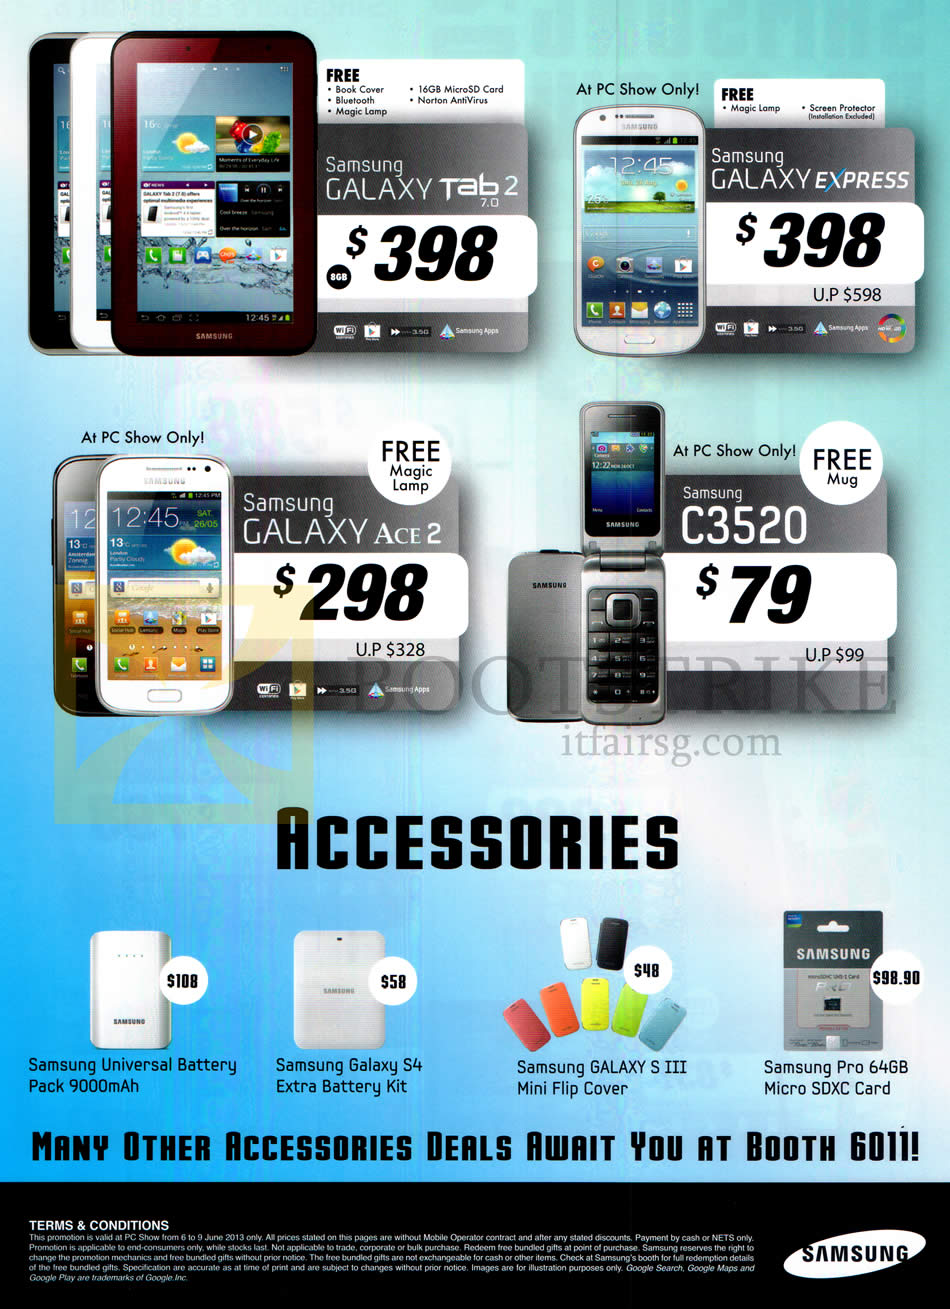 PC SHOW 2013 price list image brochure of Samsung Tablets Galaxy Tab 2 7.0, Express, Ace 2, C3520, Universal Battery, Accessories, Pro 64GB Micro SDXC Card